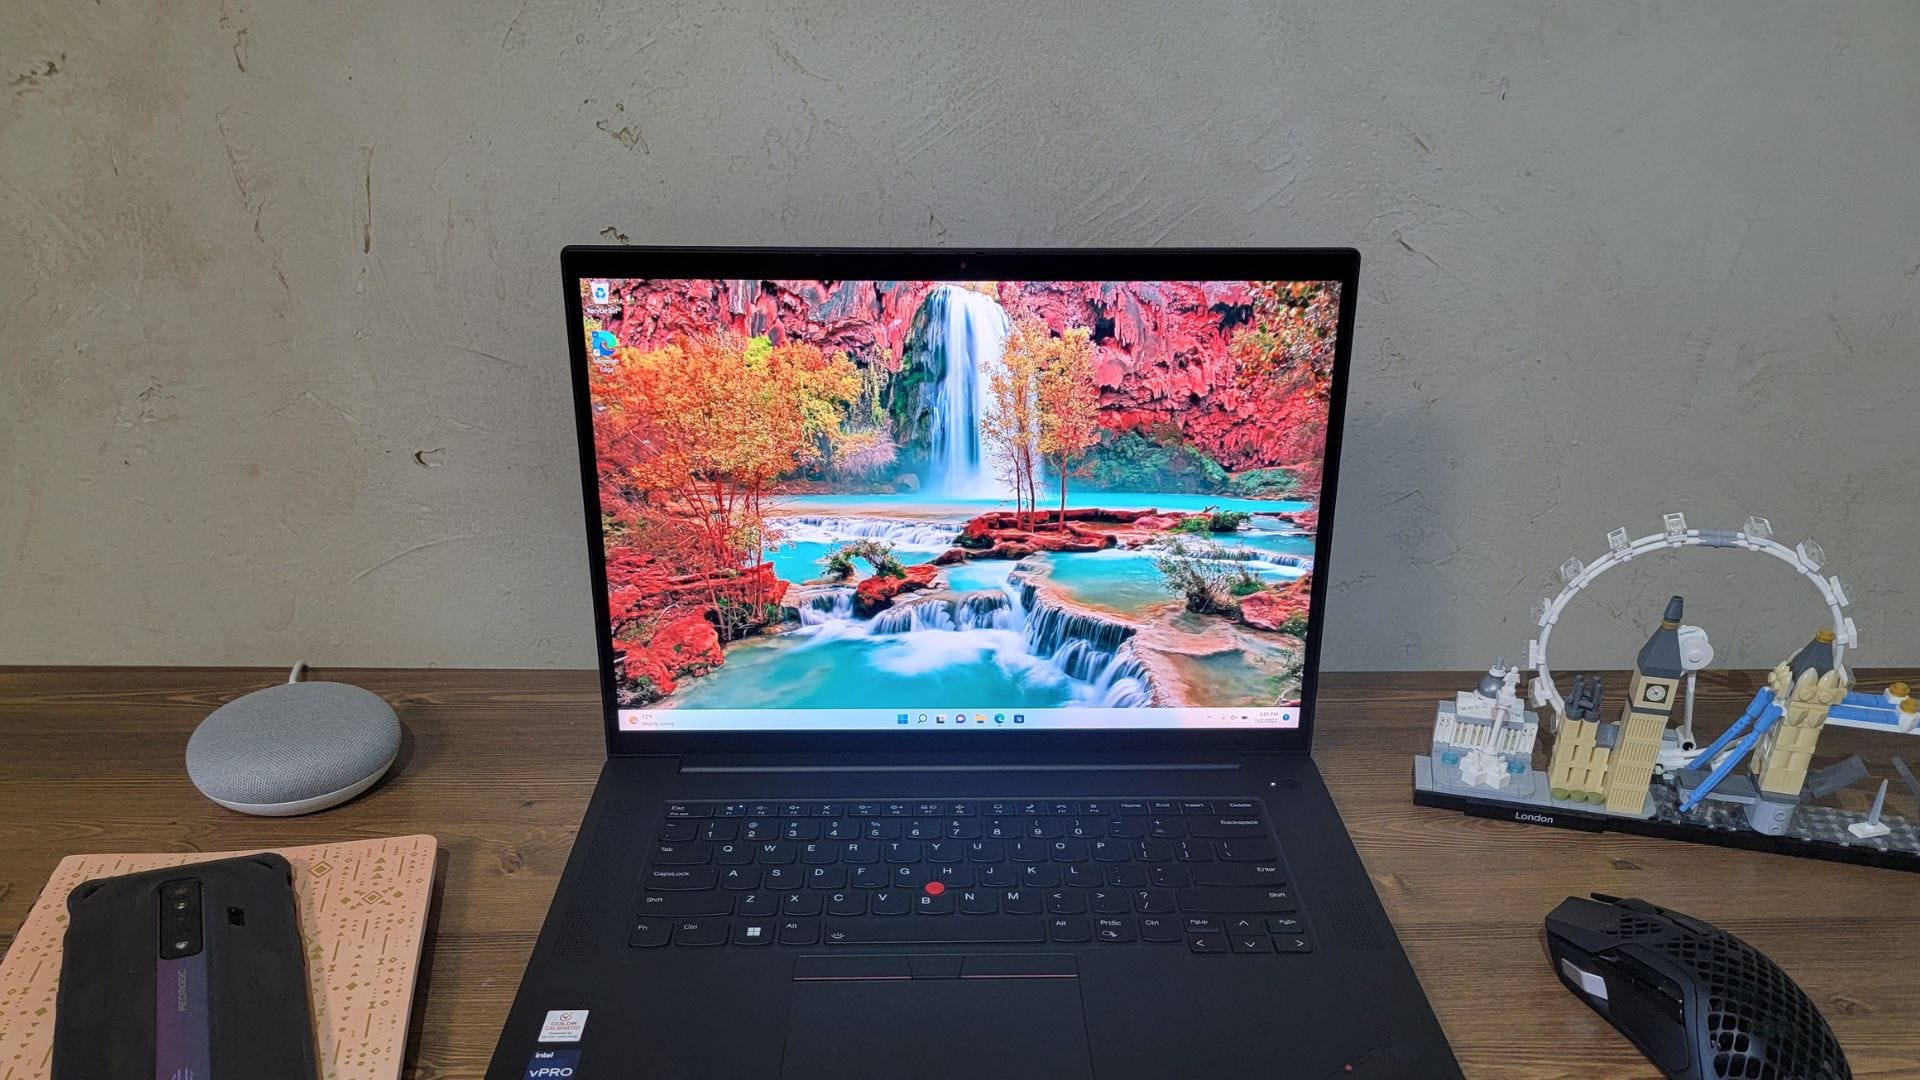 Lenovo ThinkPad X1 Extreme Gen 5 sitting on wooden desk with waterfall wallpaper shown on display